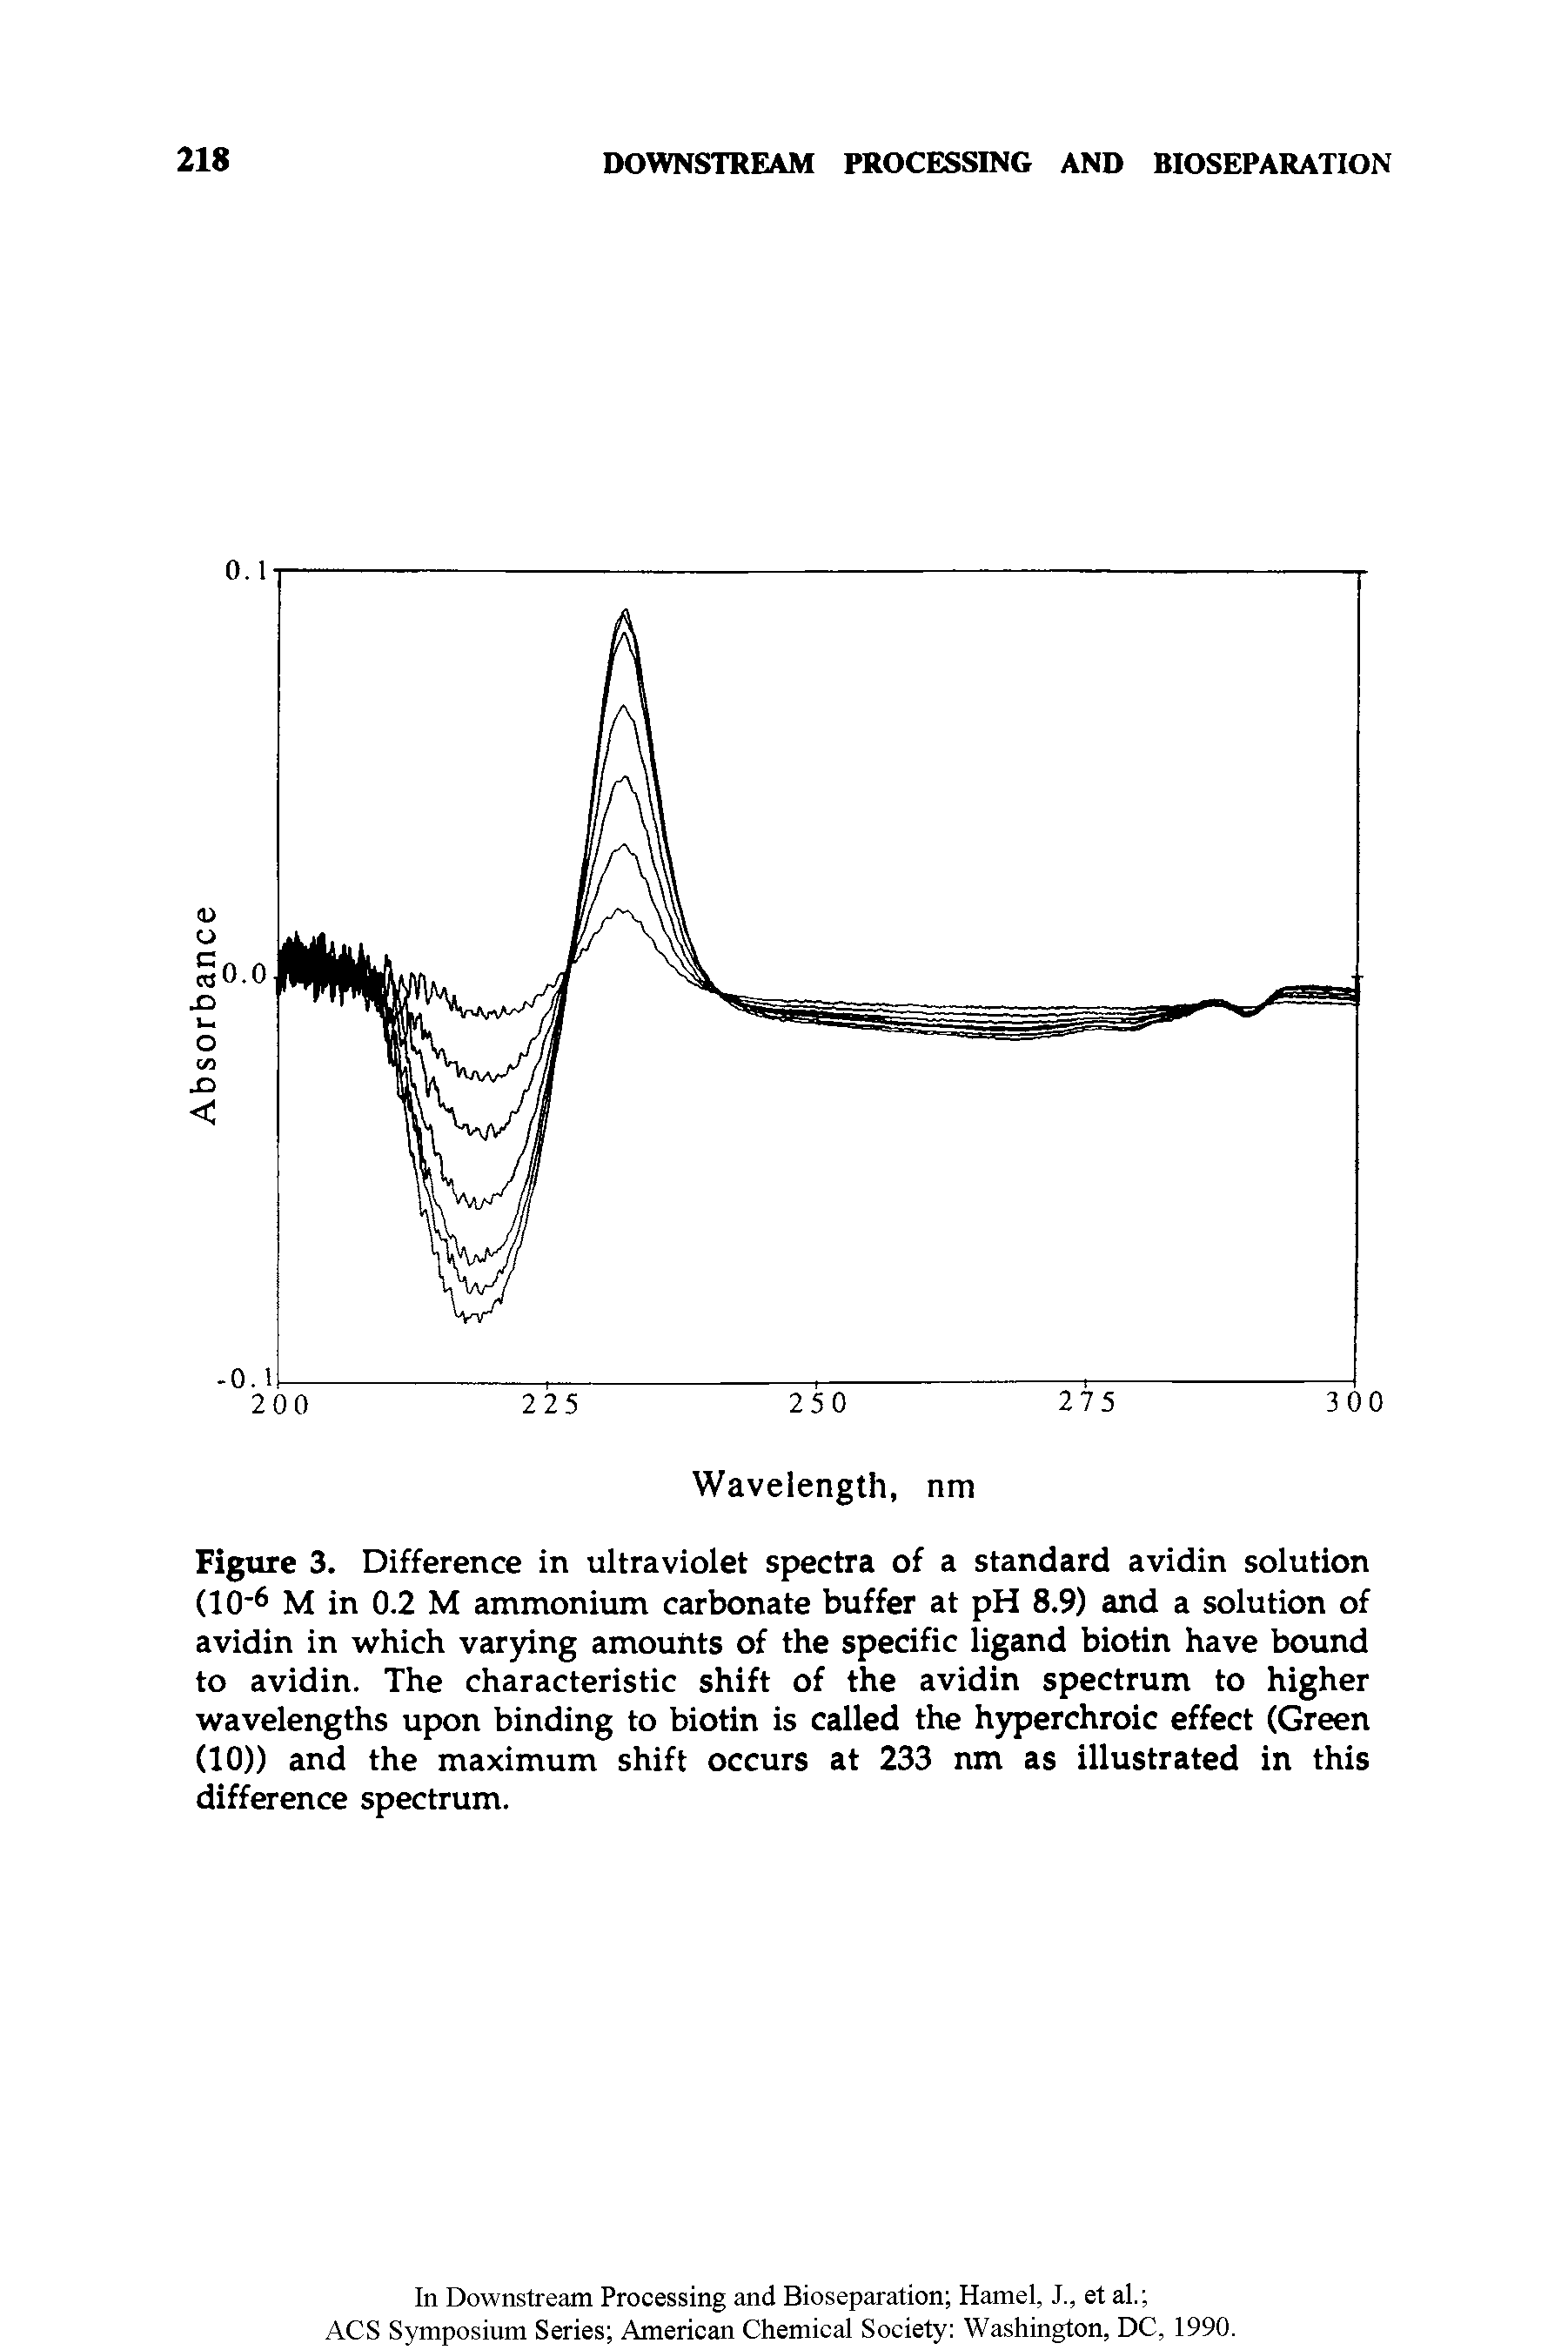 Figure 3. Difference in ultraviolet spectra of a standard avidin solution (10 6 M in 0.2 M ammonium carbonate buffer at pH 8.9) and a solution of avidin in which varying amounts of the specific ligand biotin have bound to avidin. The characteristic shift of the avidin spectrum to higher wavelengths upon binding to biotin is called the hyperchroic effect (Green (10)) and the maximum shift occurs at 233 nm as illustrated in this difference spectrum.